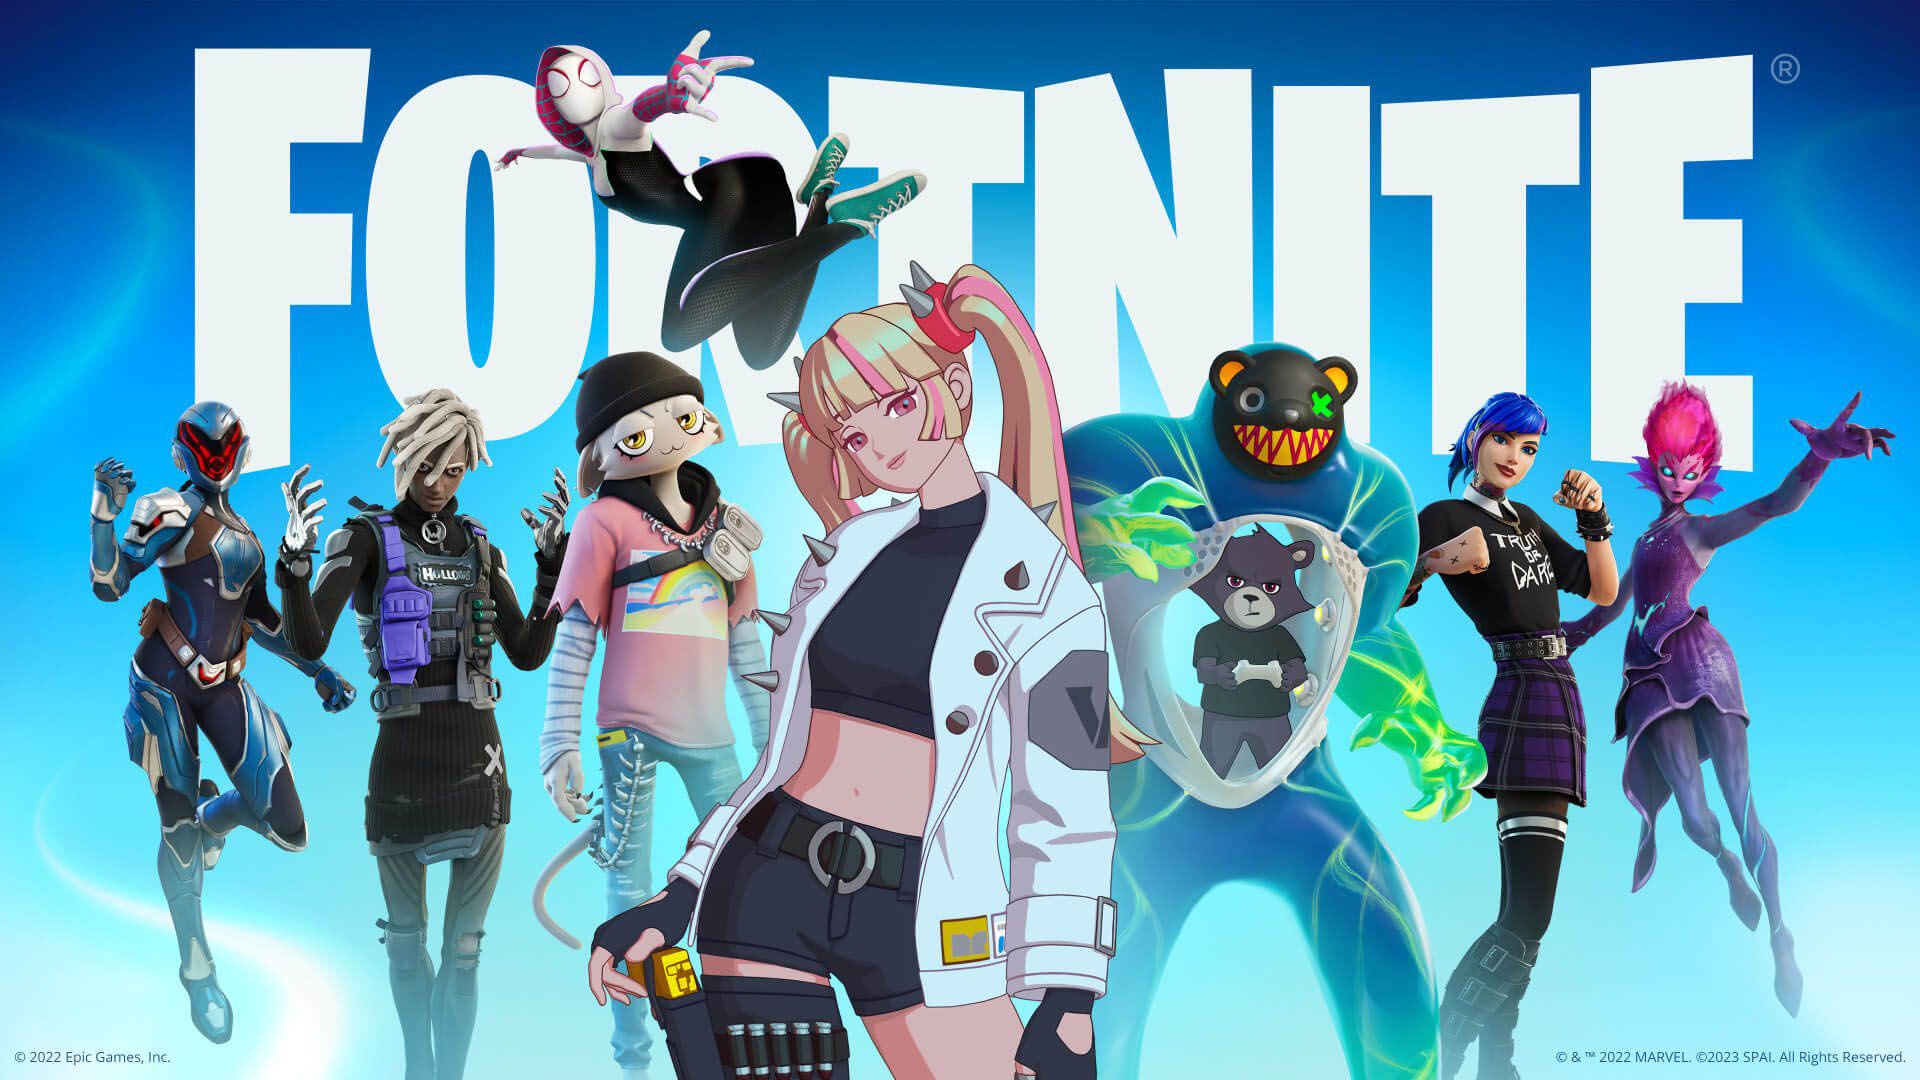 Fortnite' Season 7 Skins: Teaser and Leaks Confirm New Outfits and More